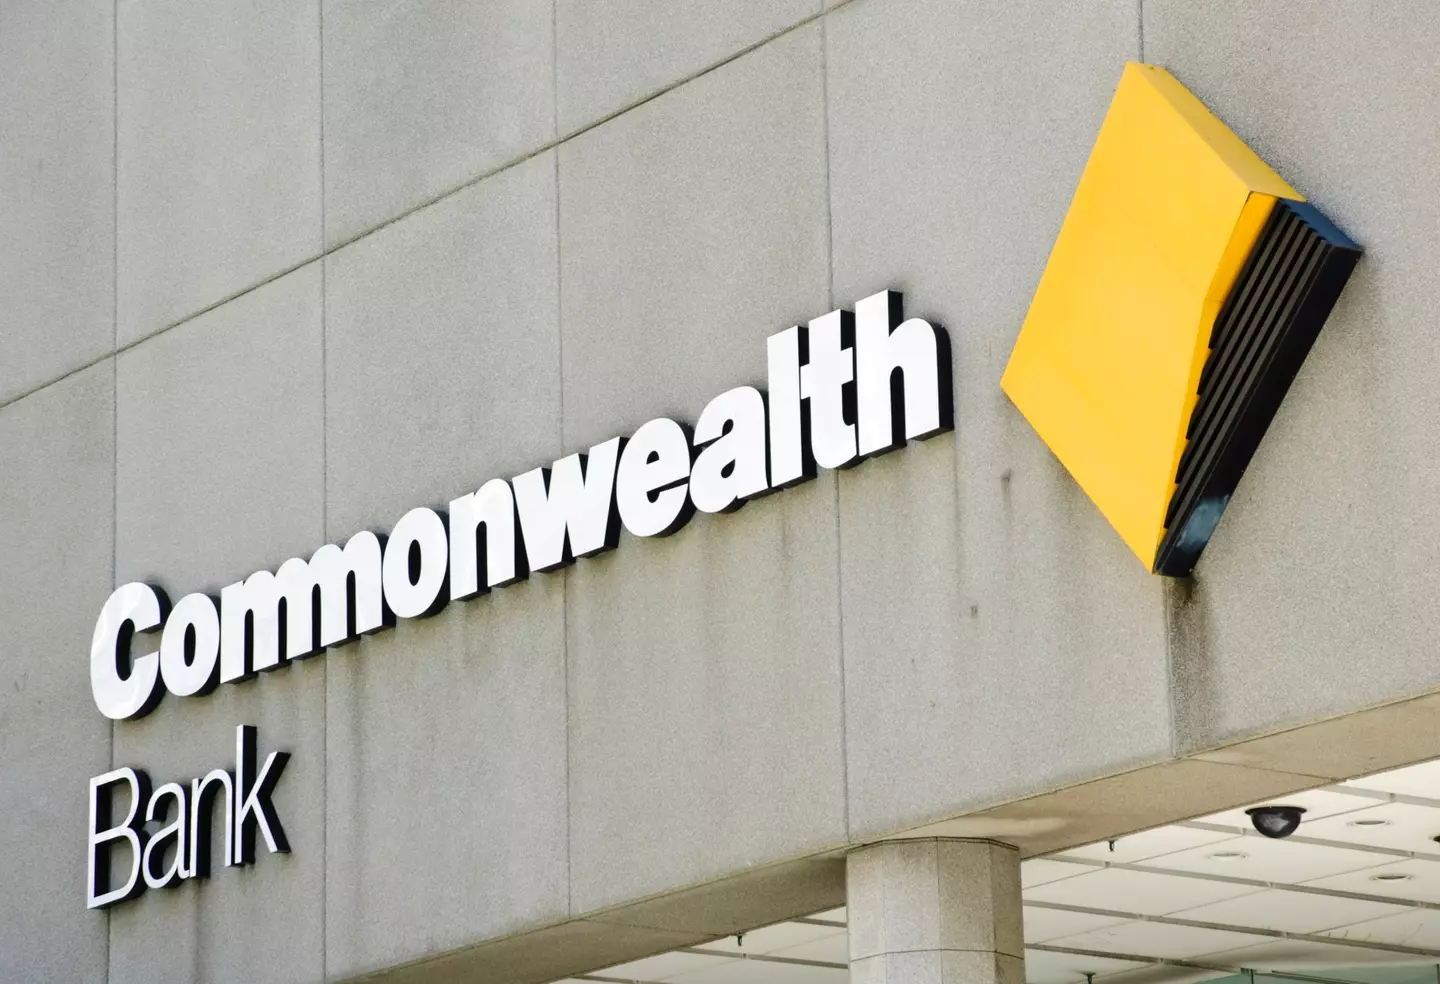 Last year, a Commonwealth Bank teller confirmed it is standard practice for the bank to ask customers a reason for withdrawing large sums of cash.